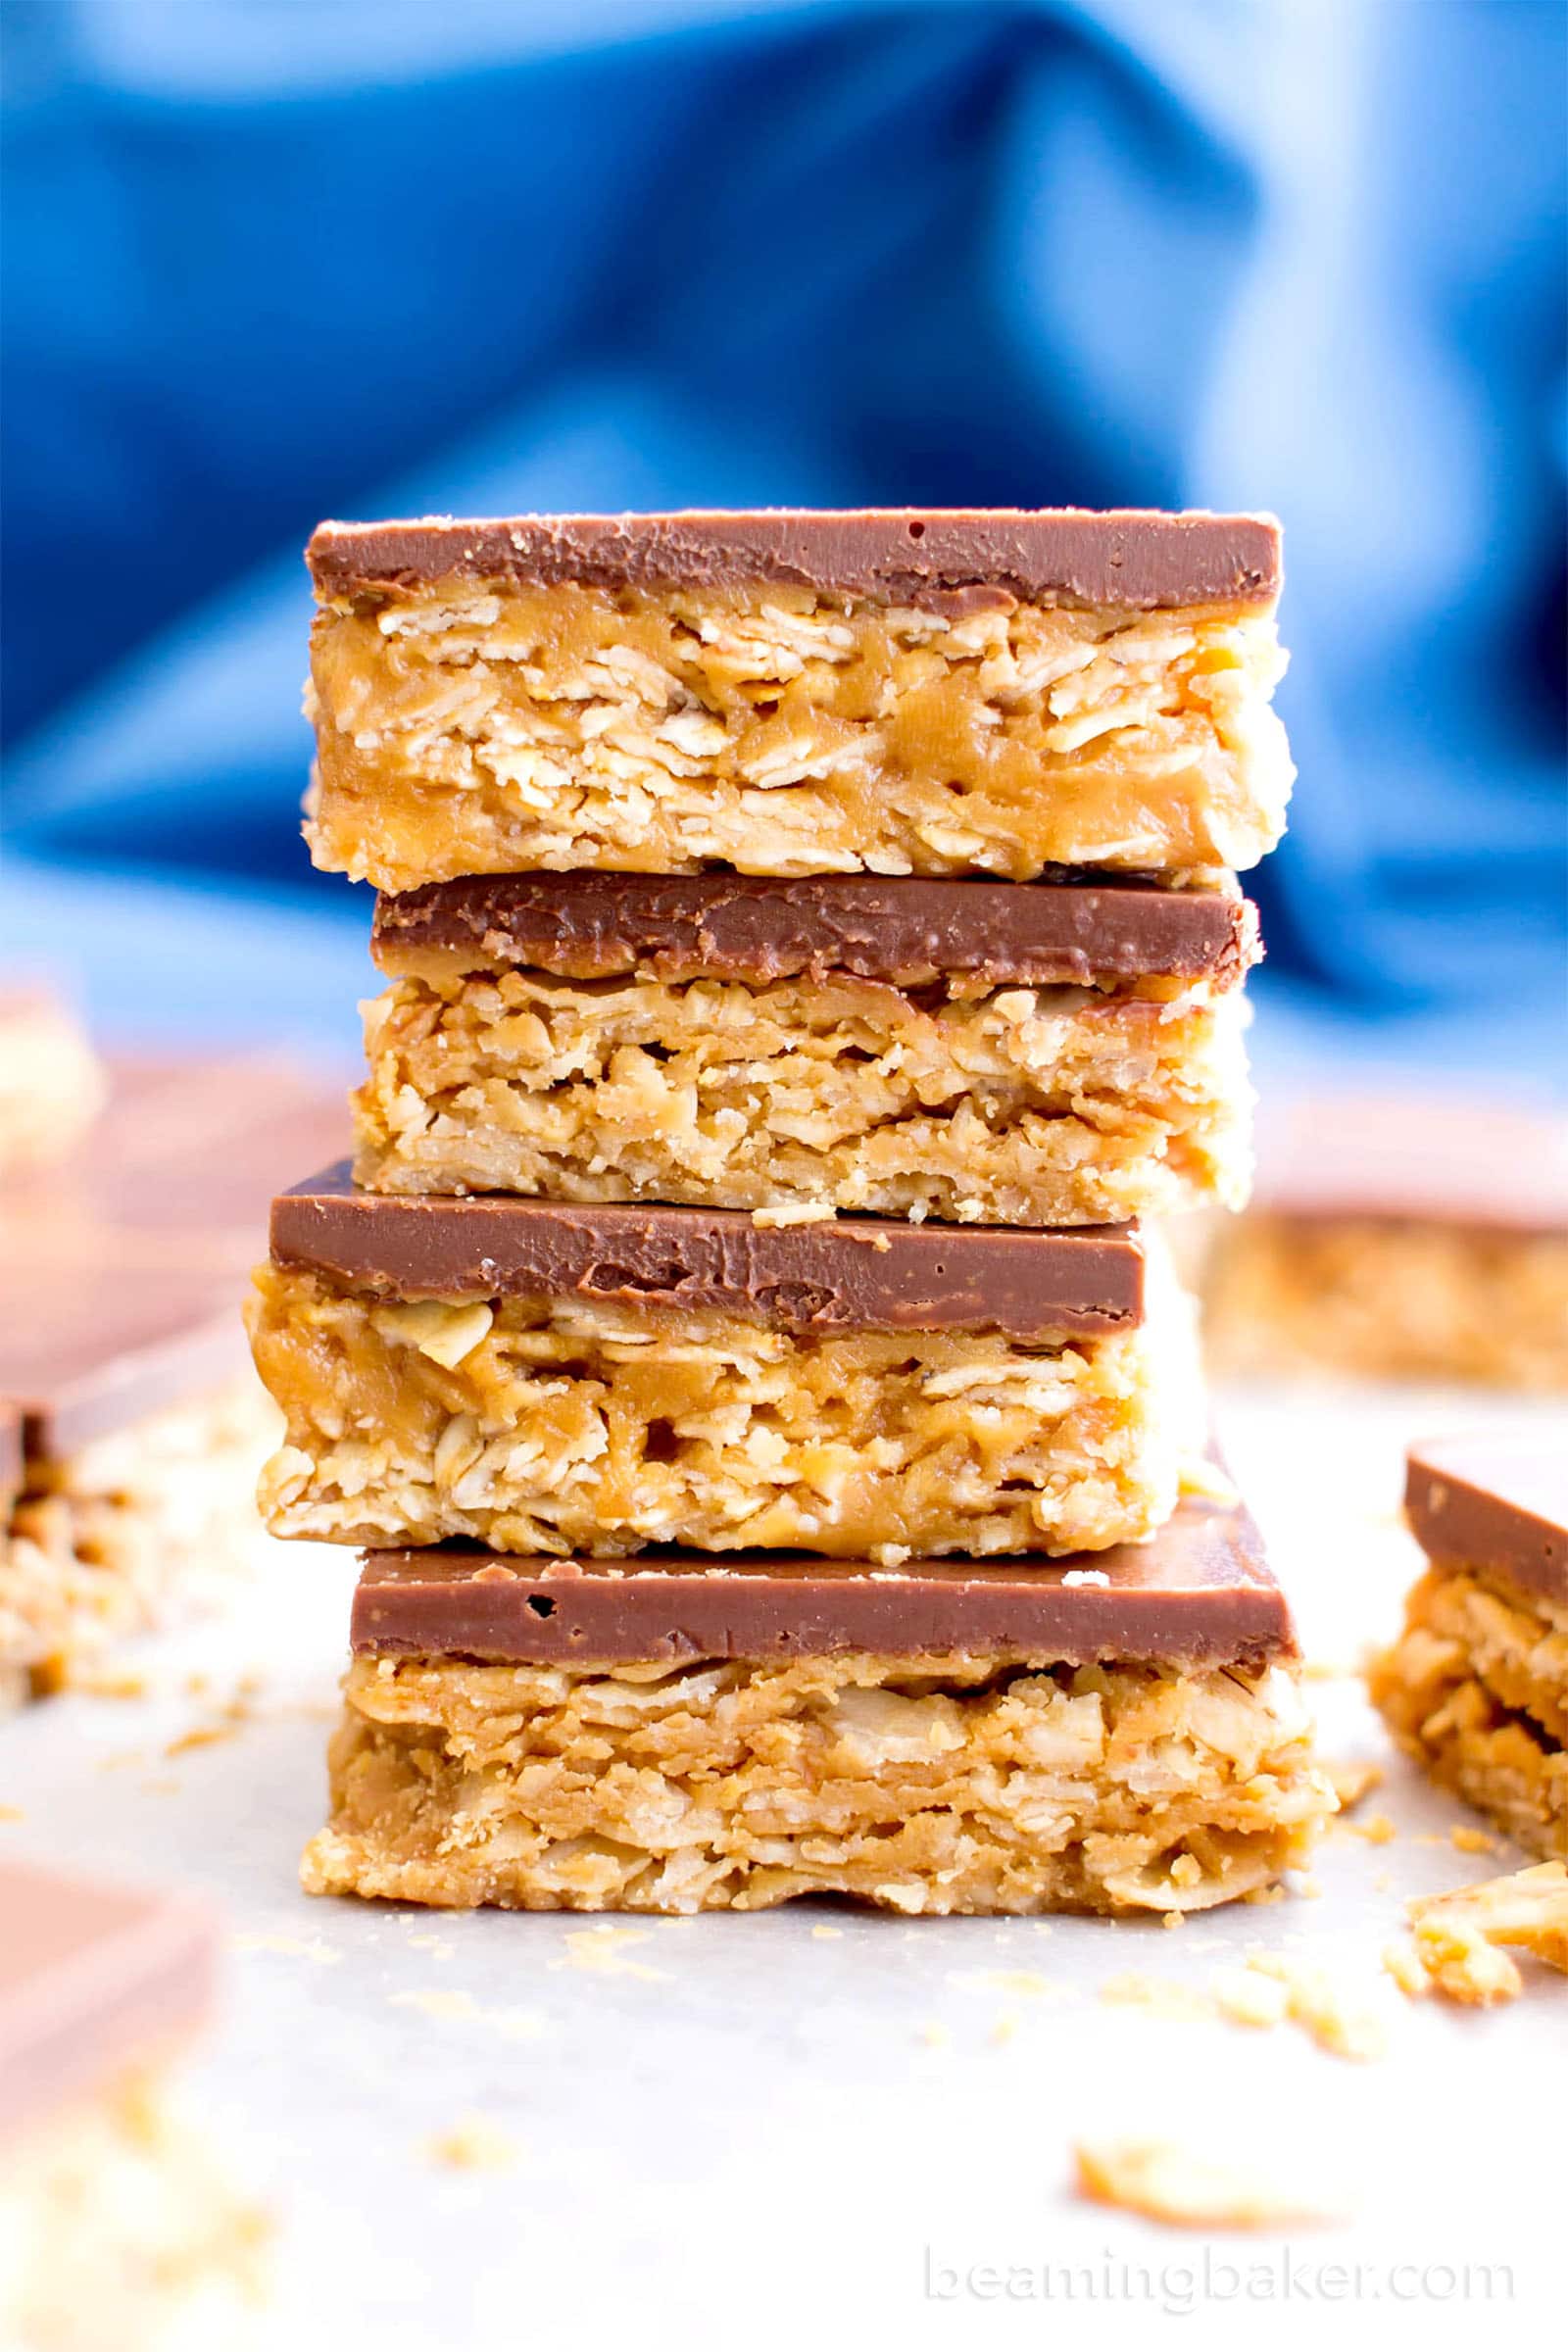 4 Ingredient No Bake Chocolate Peanut Butter Cup Granola Bars (GF, V): an easy, protein-rich recipe for decadent PB granola bars covered in chocolate, made with whole ingredients. #Vegan #ProteinPacked #GlutenFree #DairyFree #WholeGrain | BeamingBaker.com